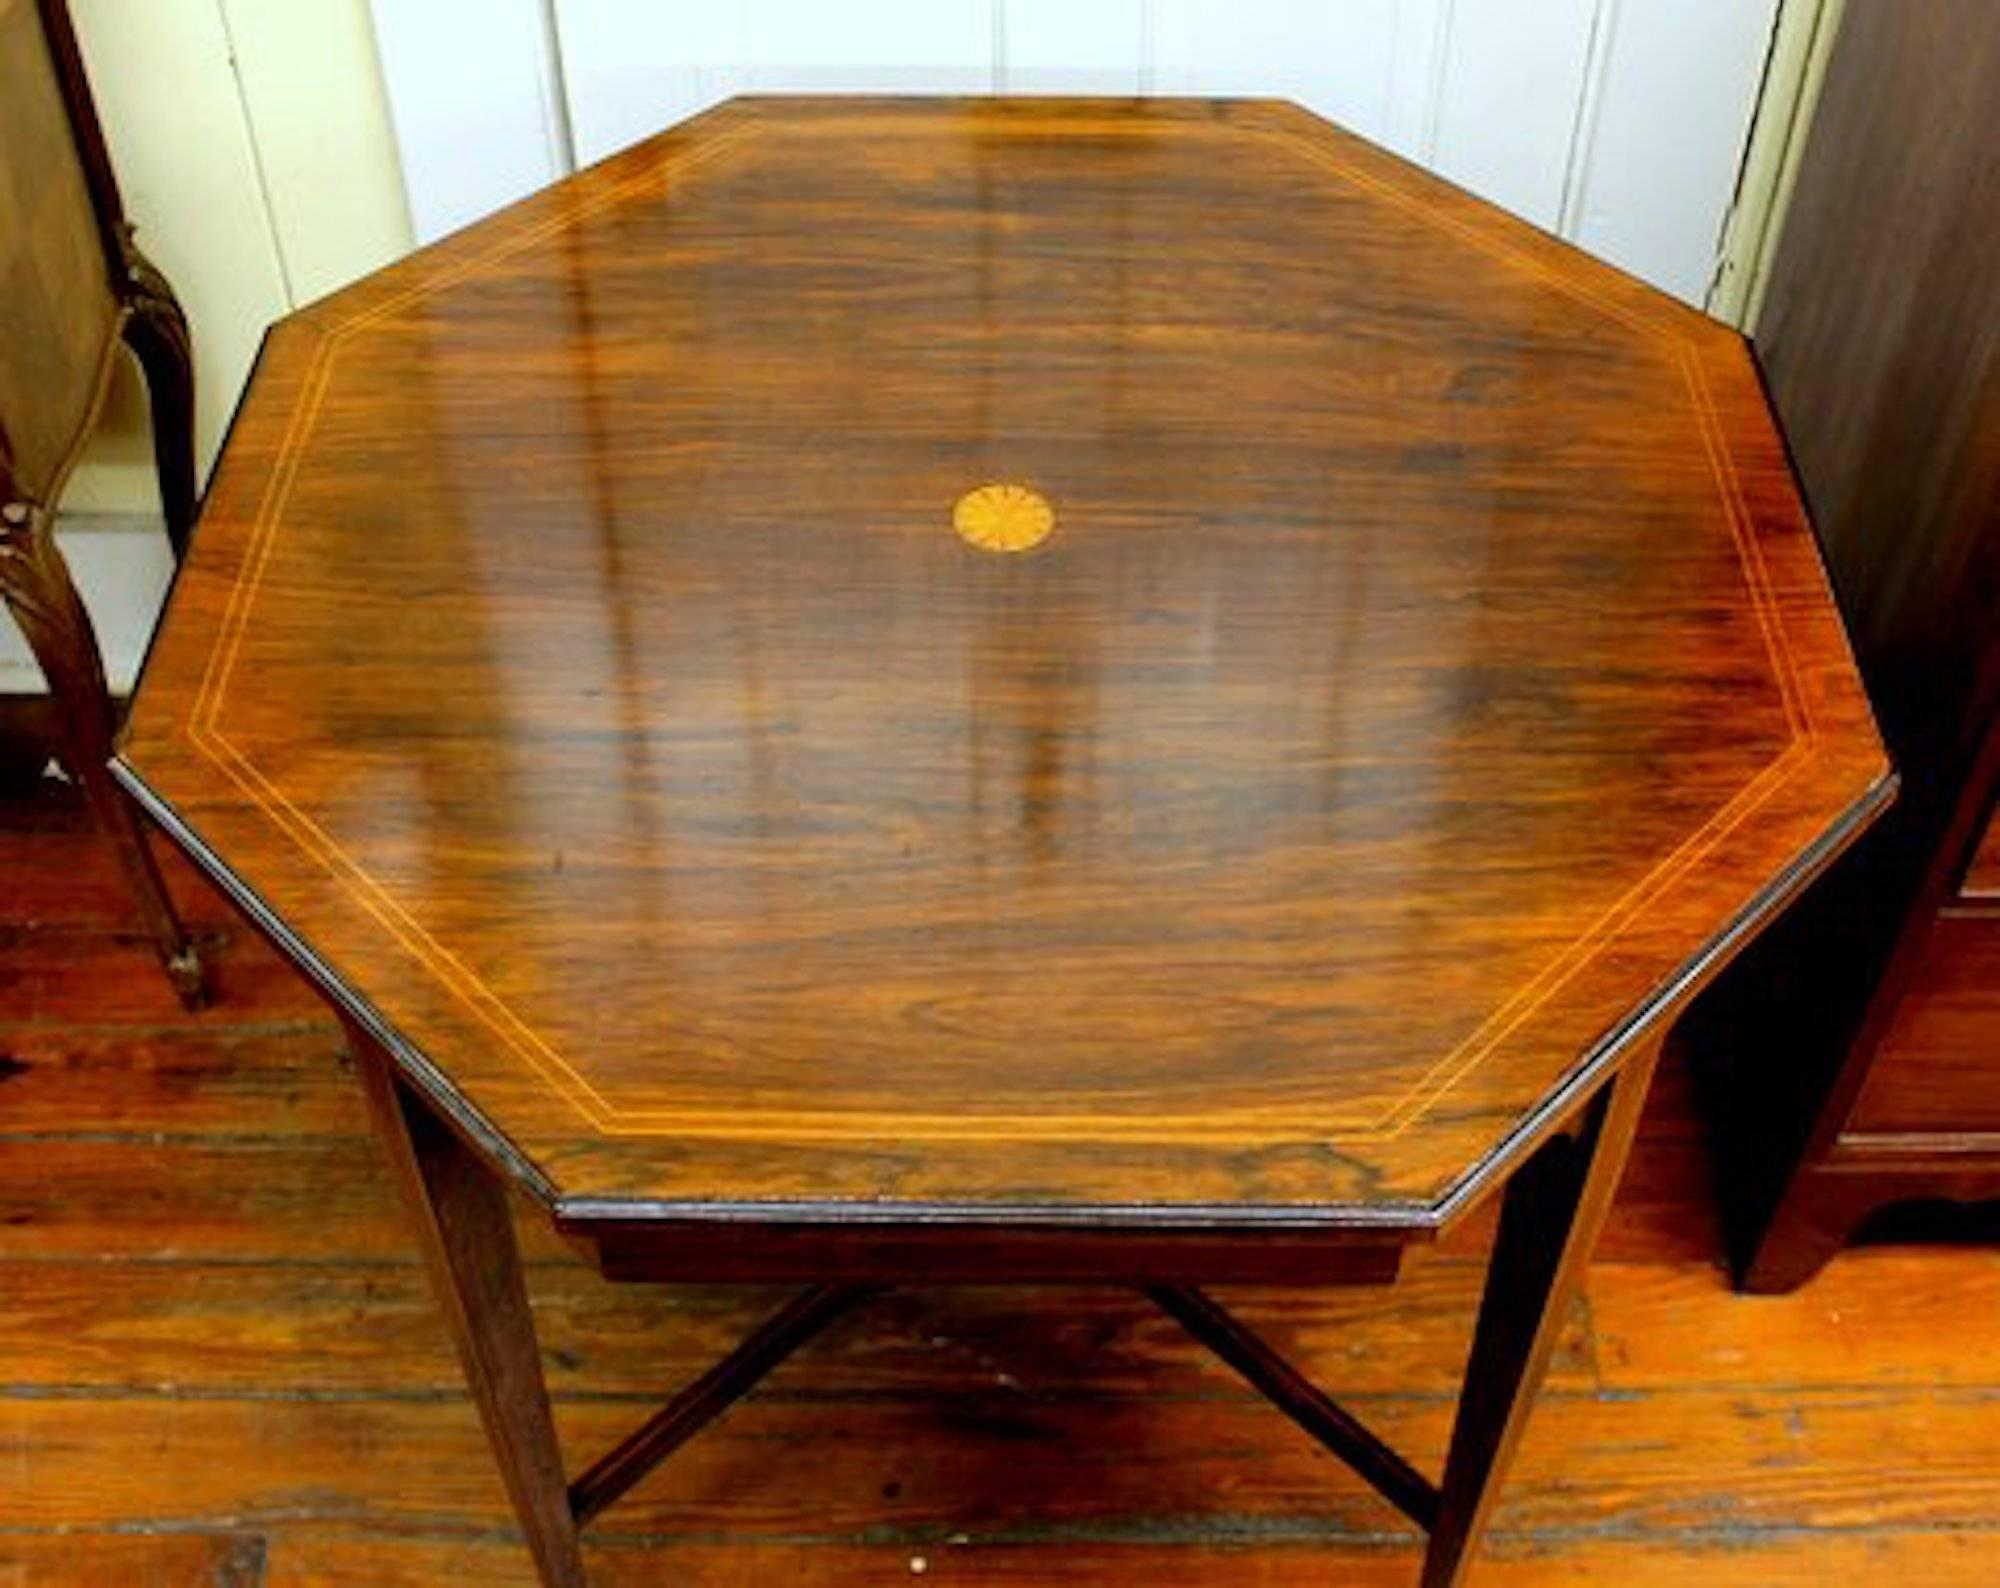 Rare and important antique English James Shoolbred (London) inlaid rosewood octagonal shape occasional or games table

